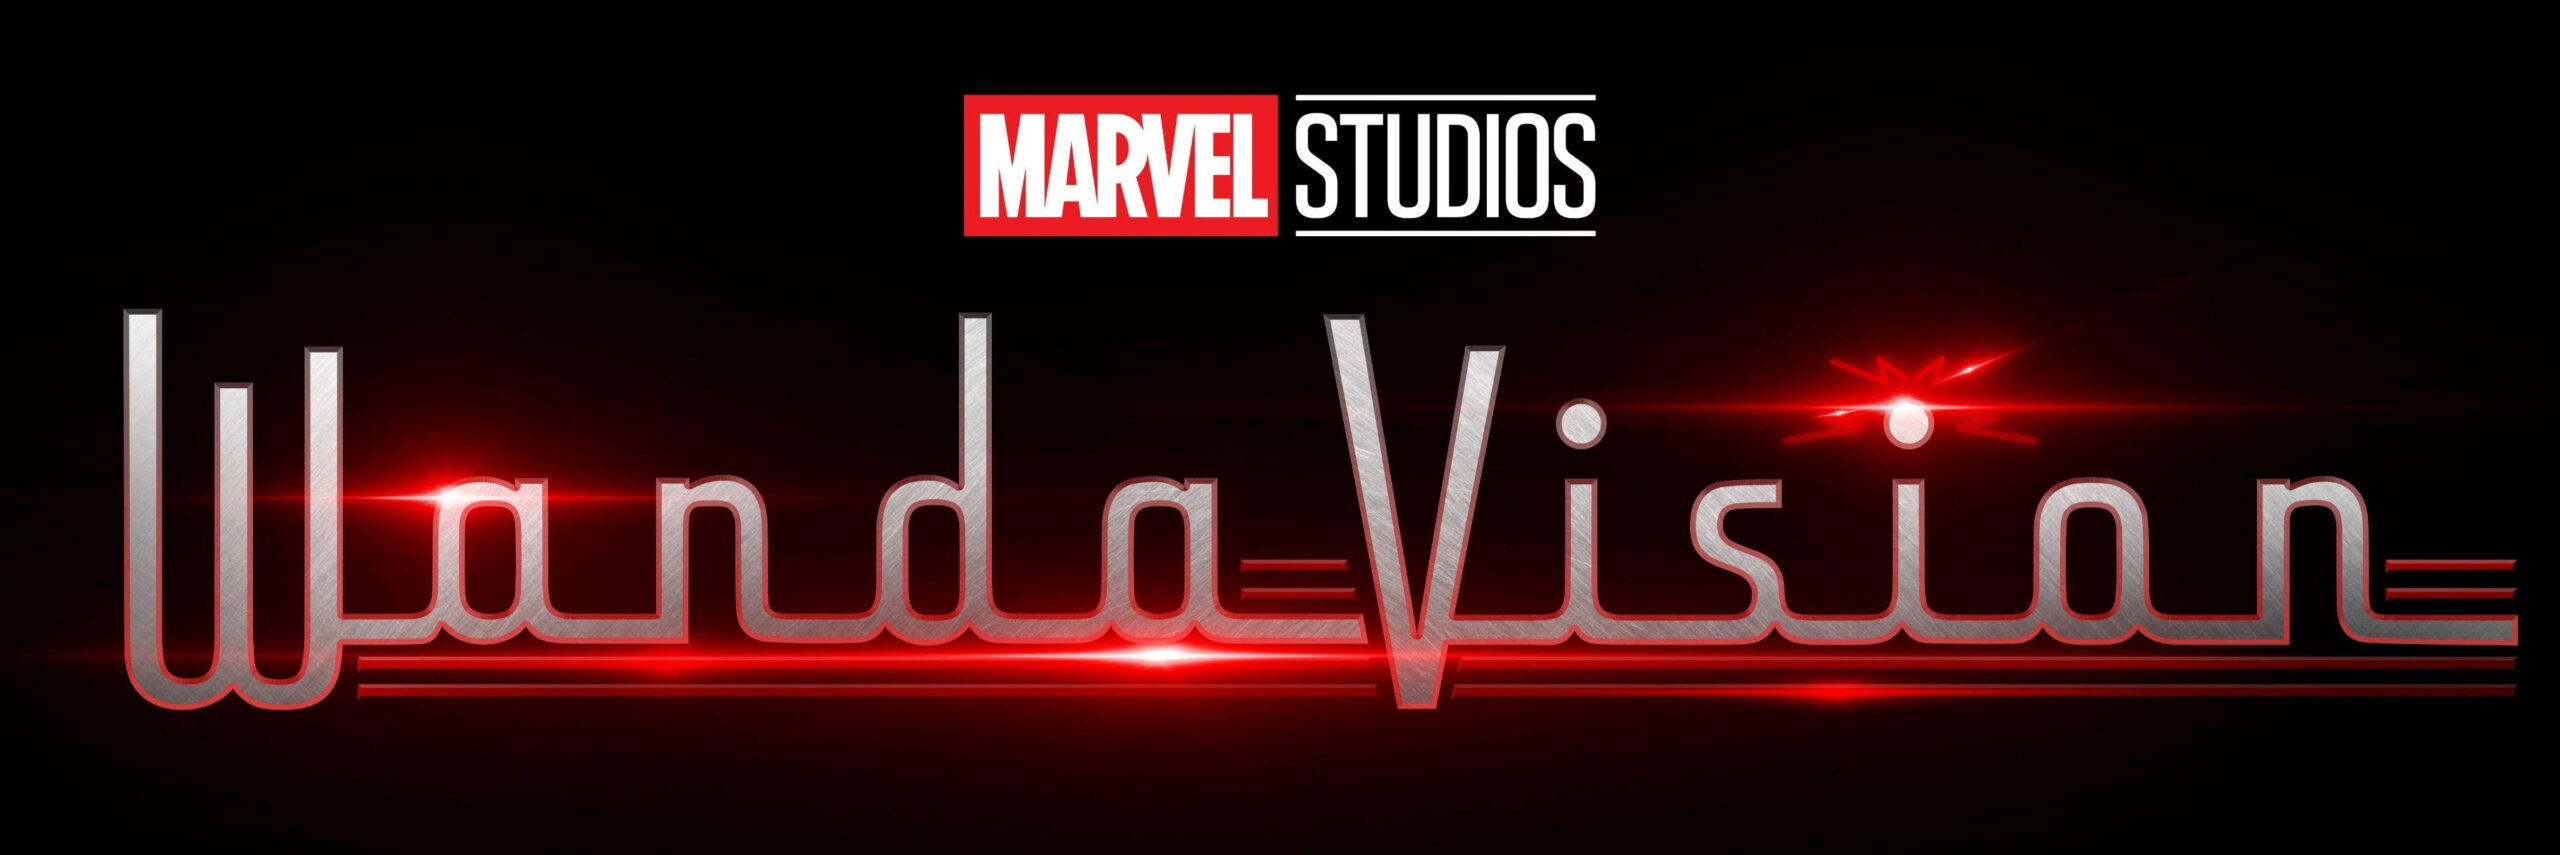 WandaVision. Know your marvel movies. Characters and Thoughts. 